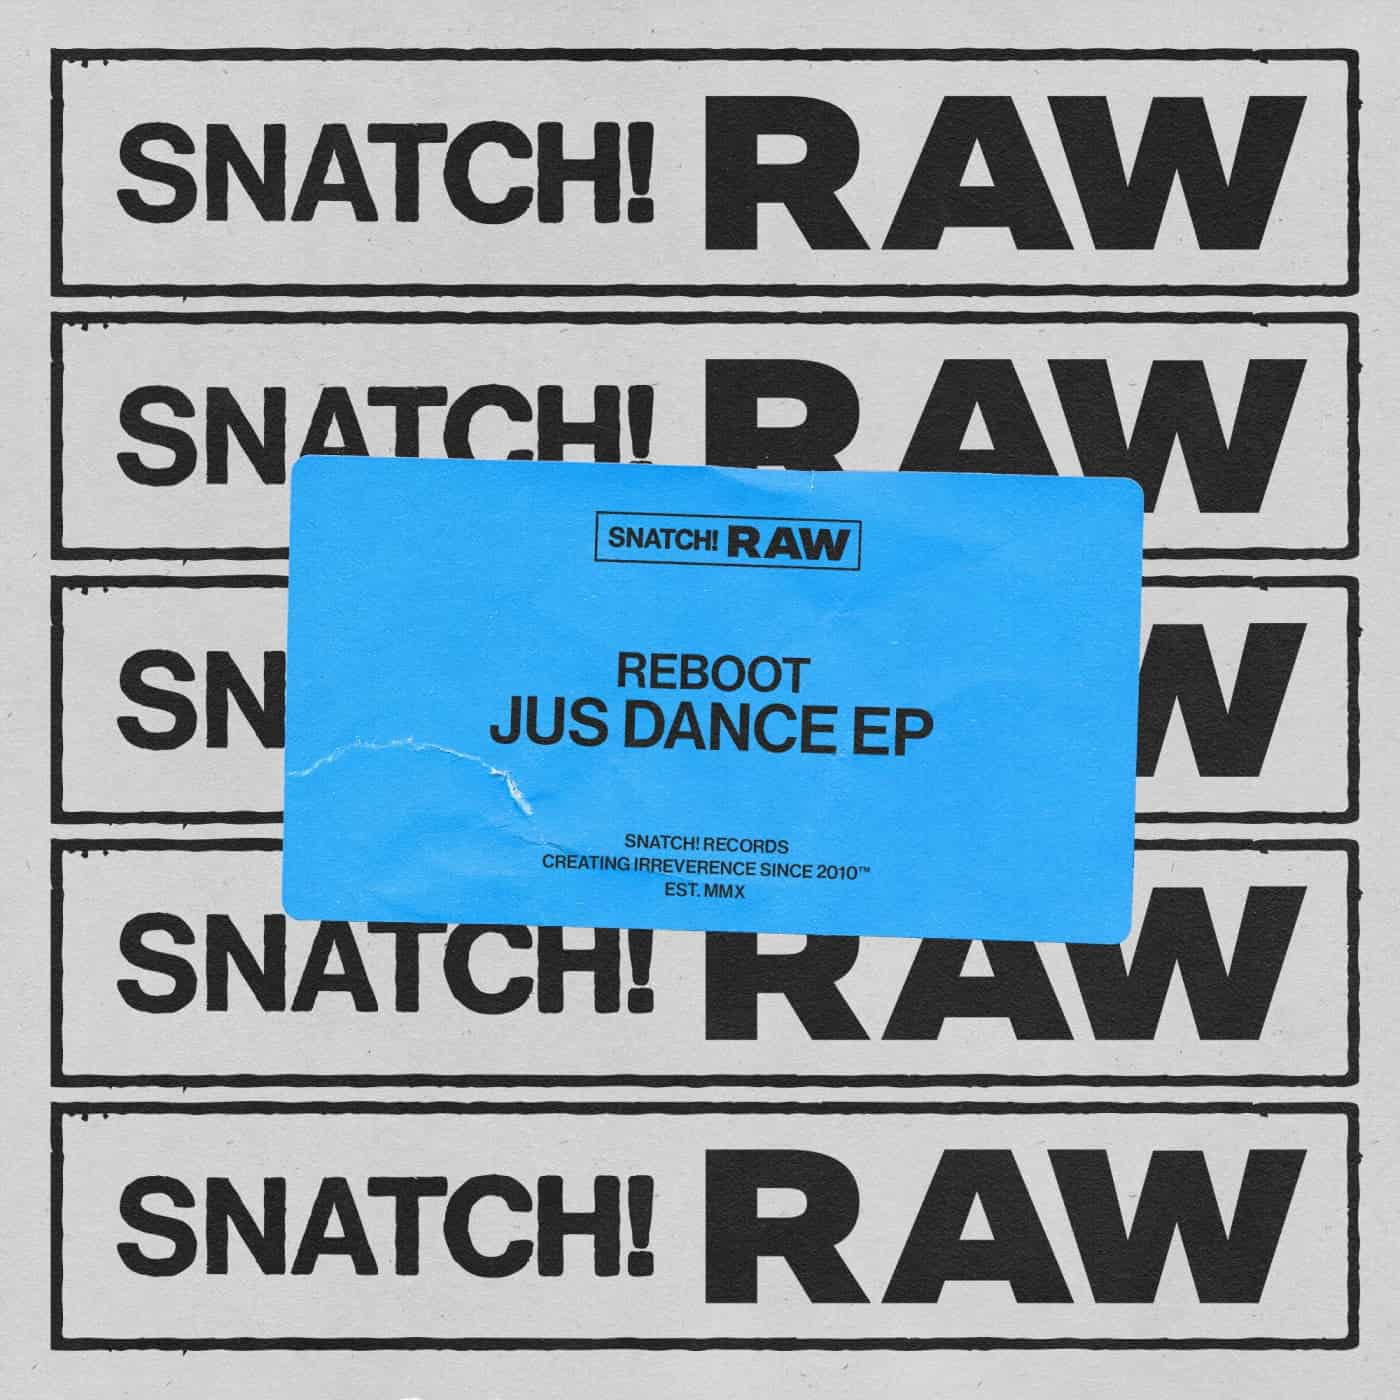 image cover: Jus Dance EP by Reboot on Snatch! Records